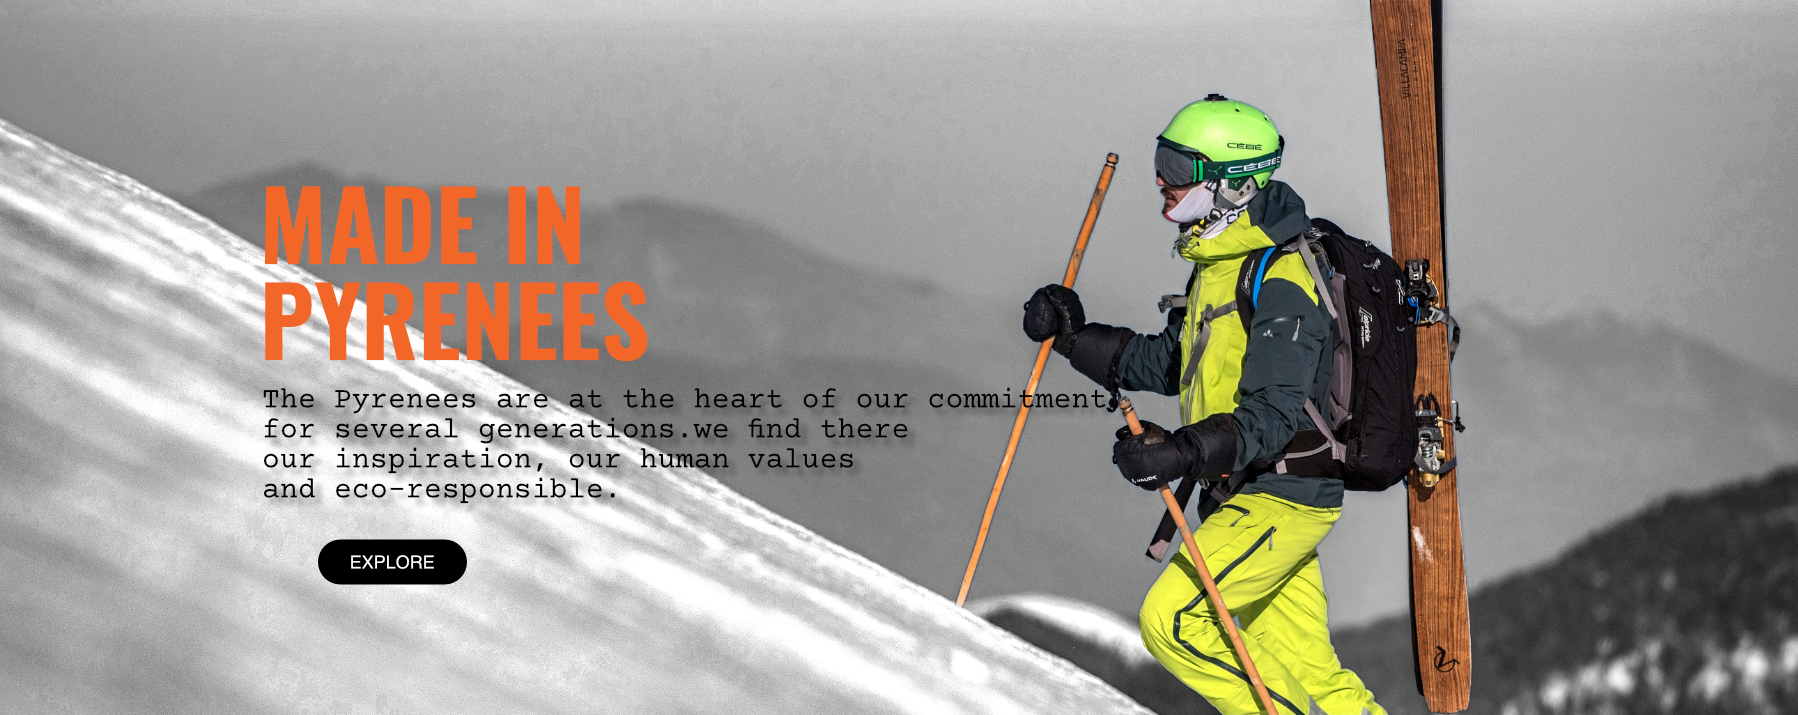 The Pyrenees have been at the heart of our commitment for several generations. Palau Ski Boot Liners finds its inspiration and its human and eco-responsible values ​​there.